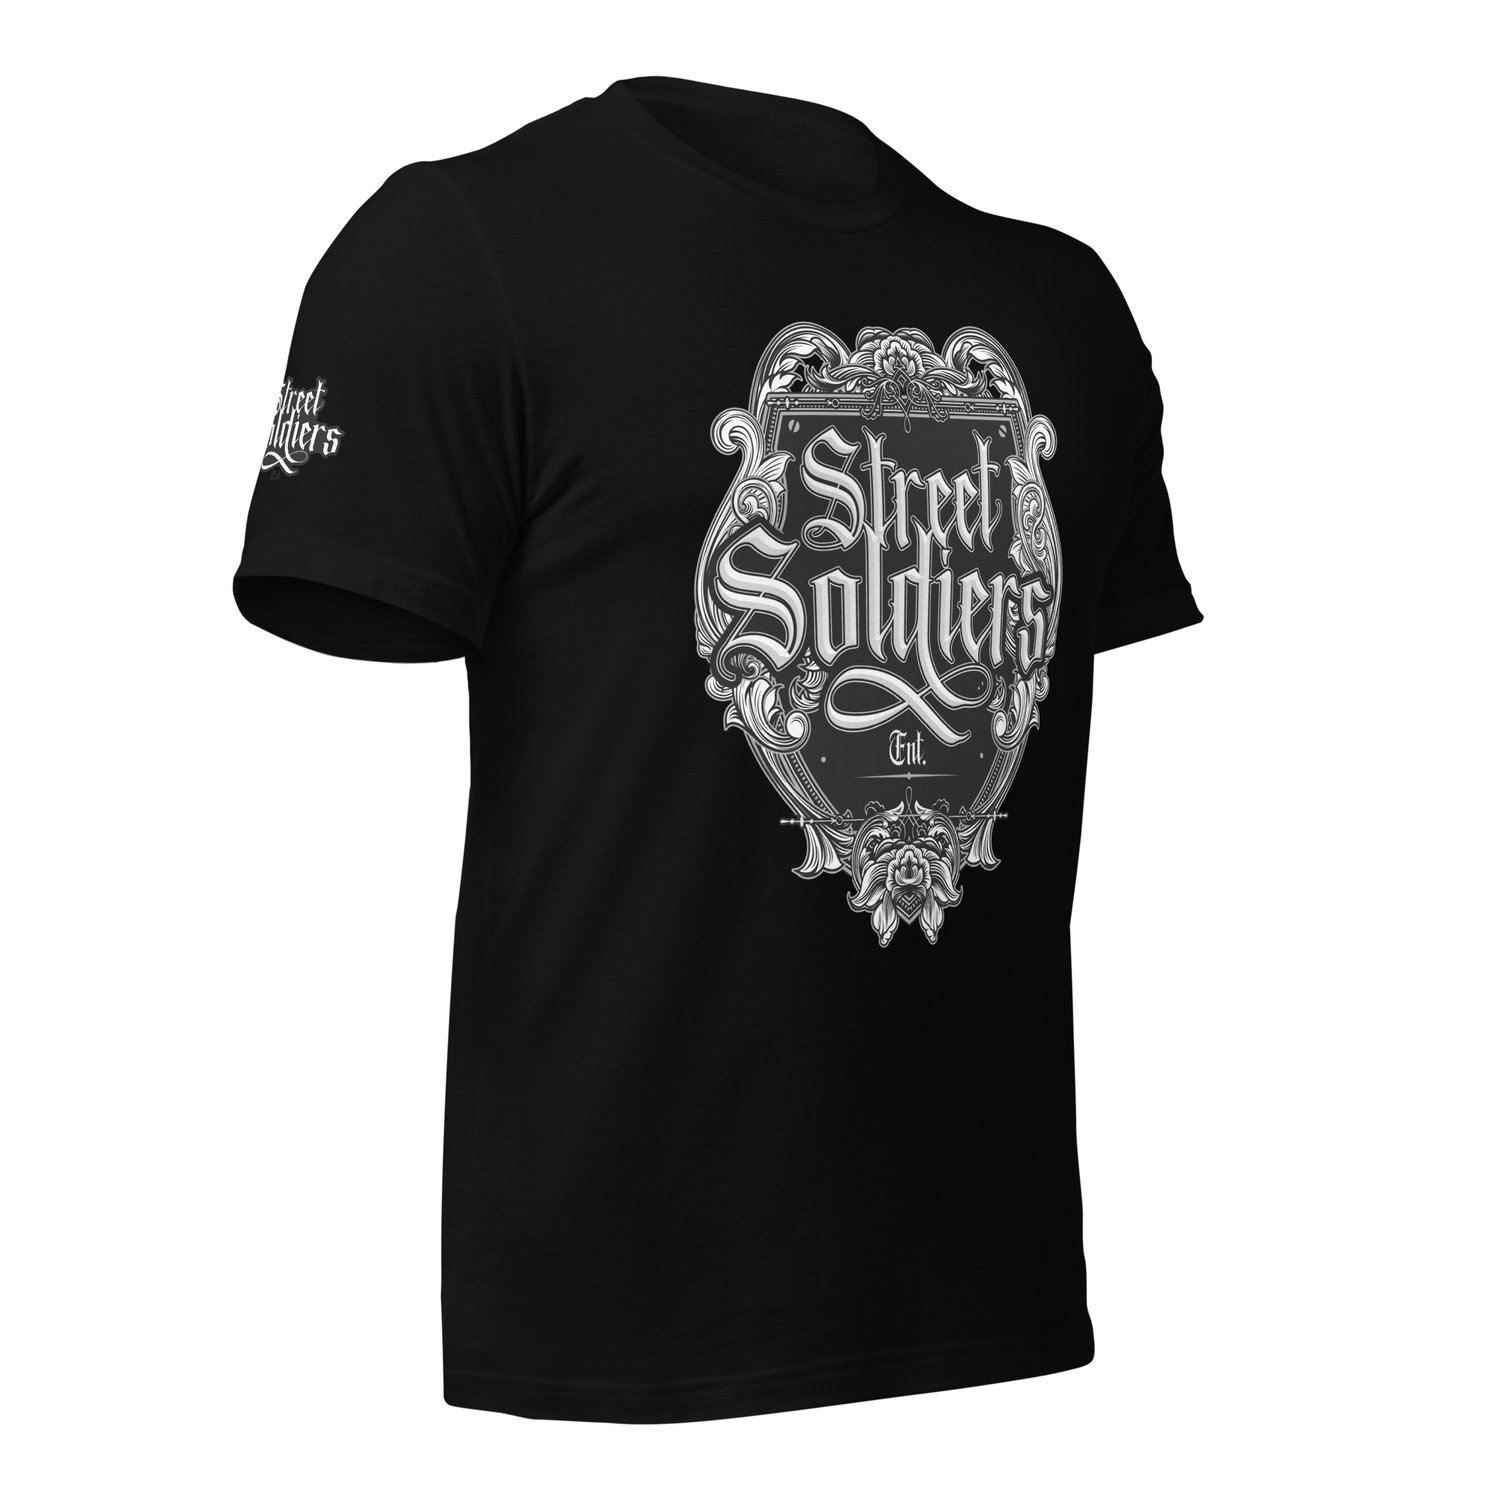 Image of Street Soldiers Ent. Logo T Shirt (Black) 